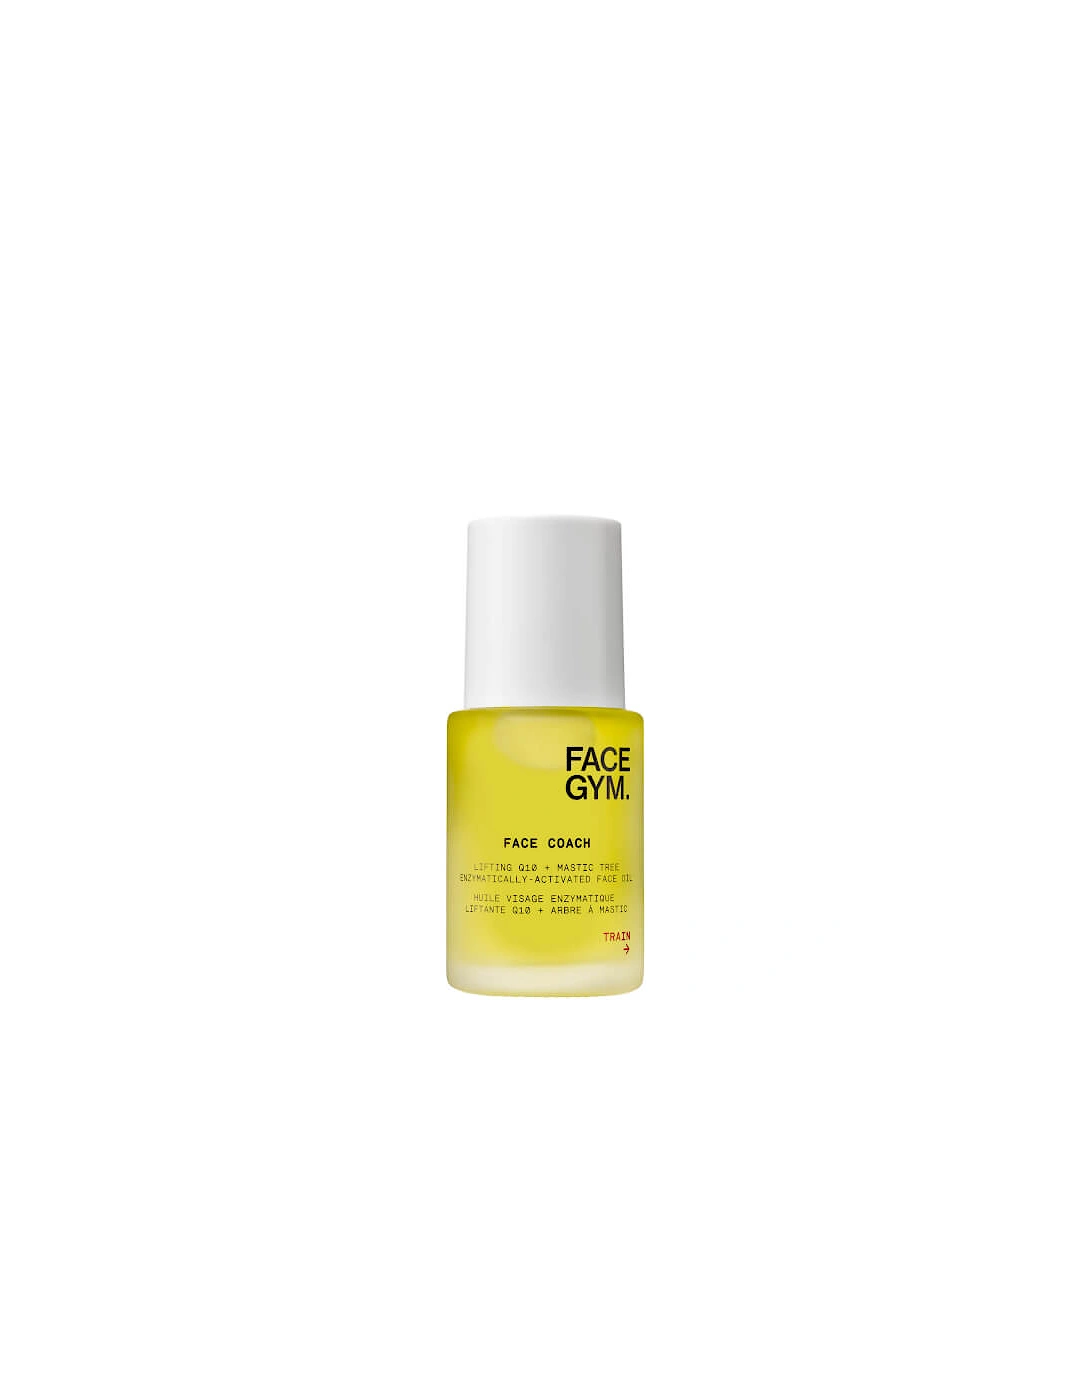 Face Coach Lifting Q10 and Mastic Tree Enzymatically-Activated Face Oil 30ml - - Face Coach Lifting Q10 and Mastic Tree Enzymatically-Activated Face Oil 30ml - Face Coach Lifting Q10 and Mastic Tree Enzymatically-activated Face Oil 15ml, 2 of 1